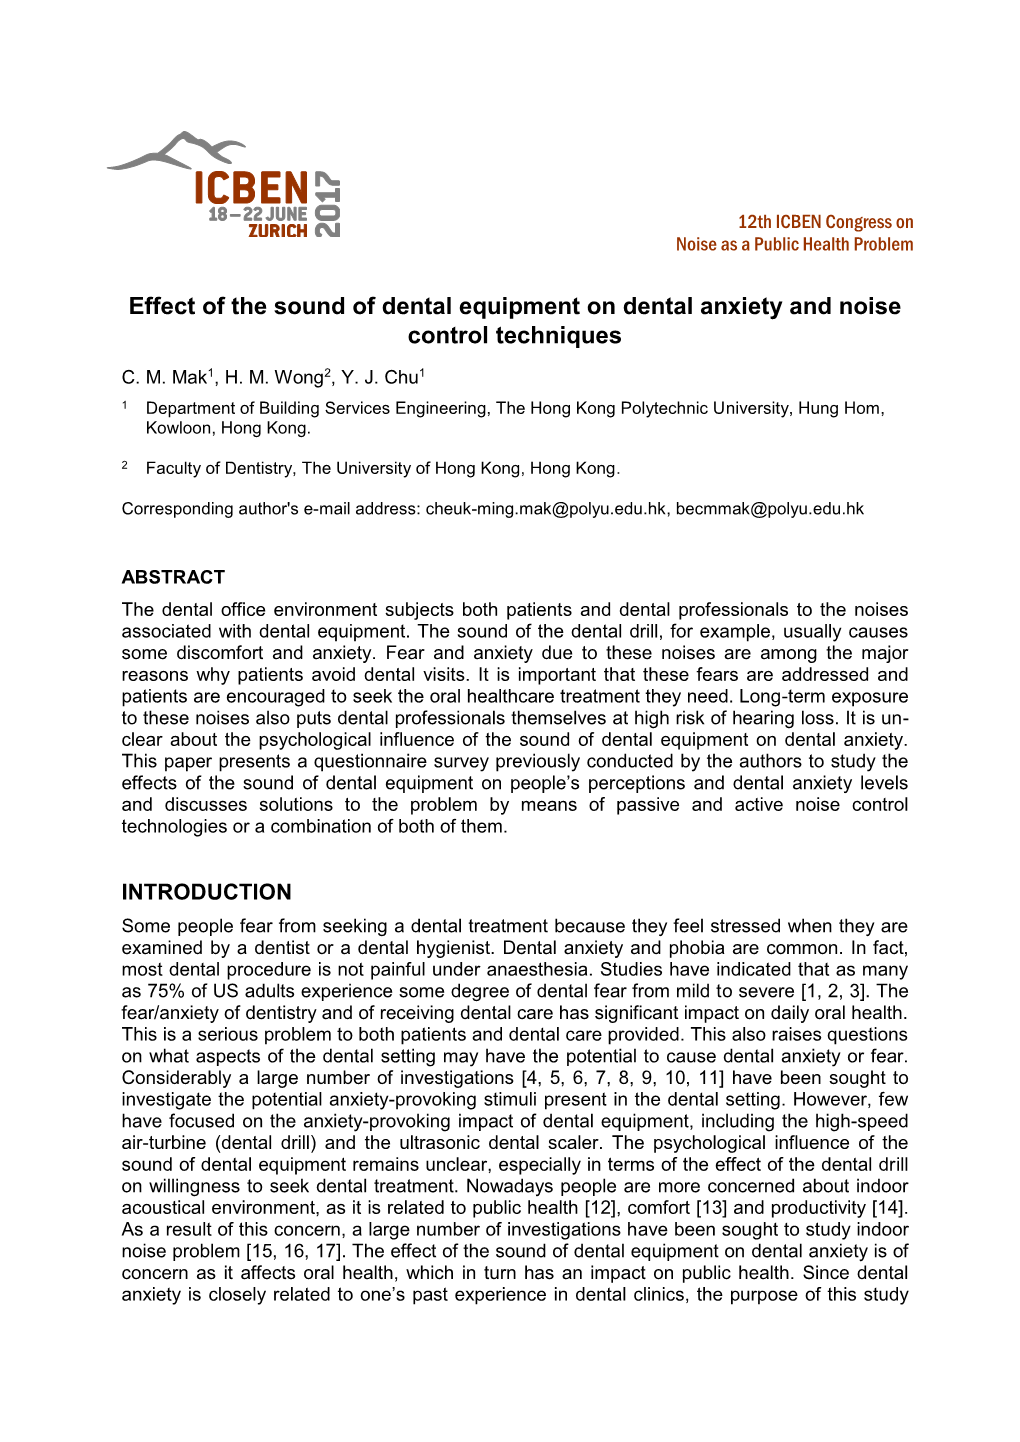 Effect of the Sound of Dental Equipment on Dental Anxiety and Noise Control Techniques